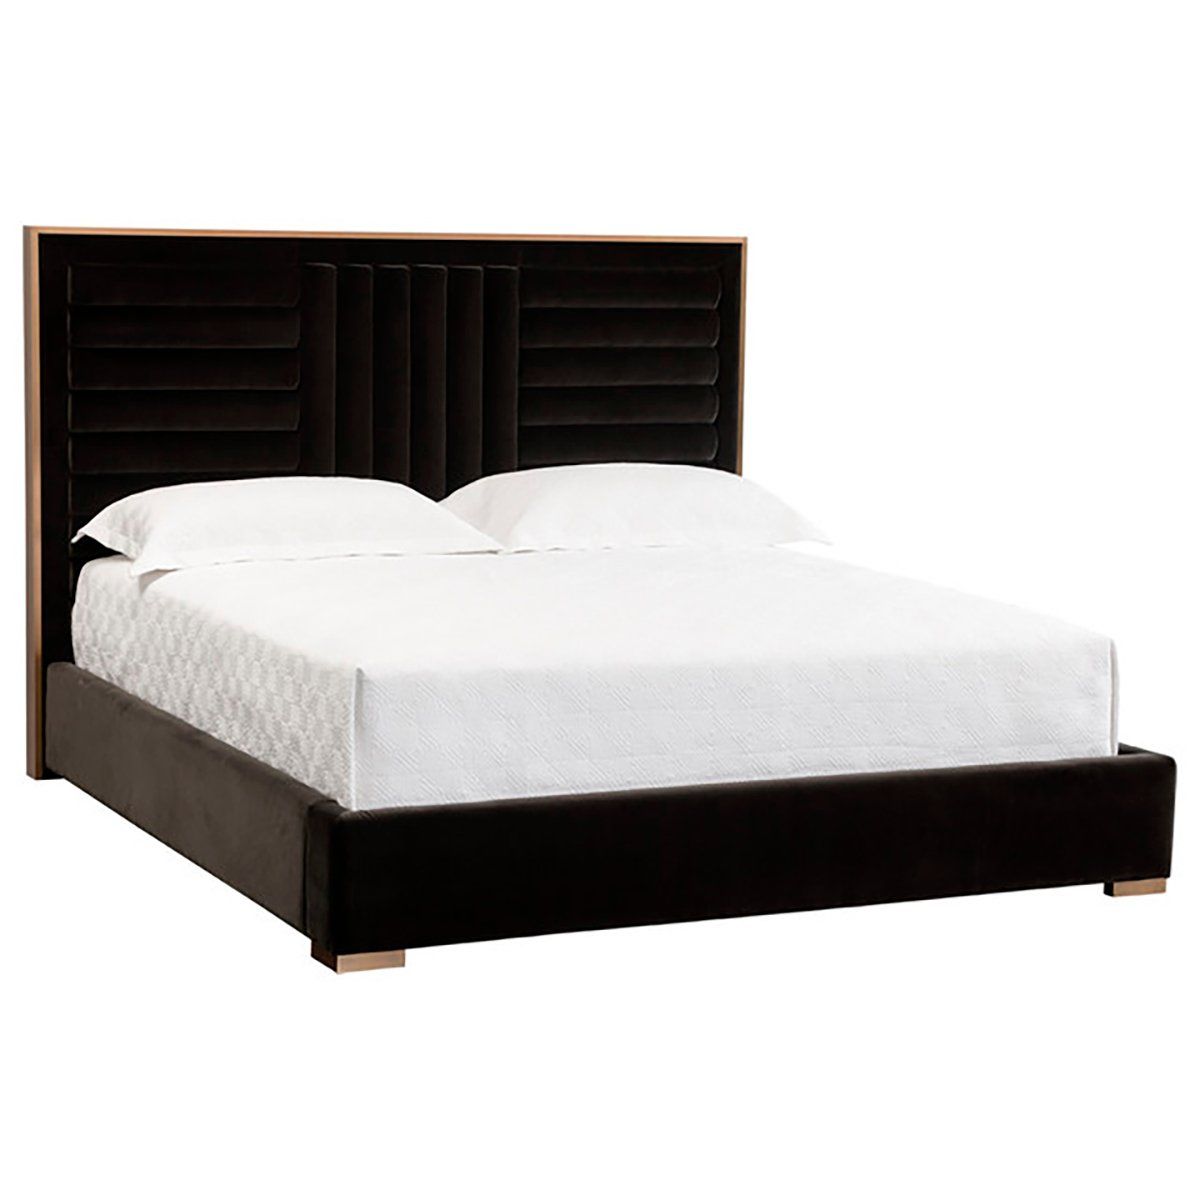 Double bed 180x200 black Persius King